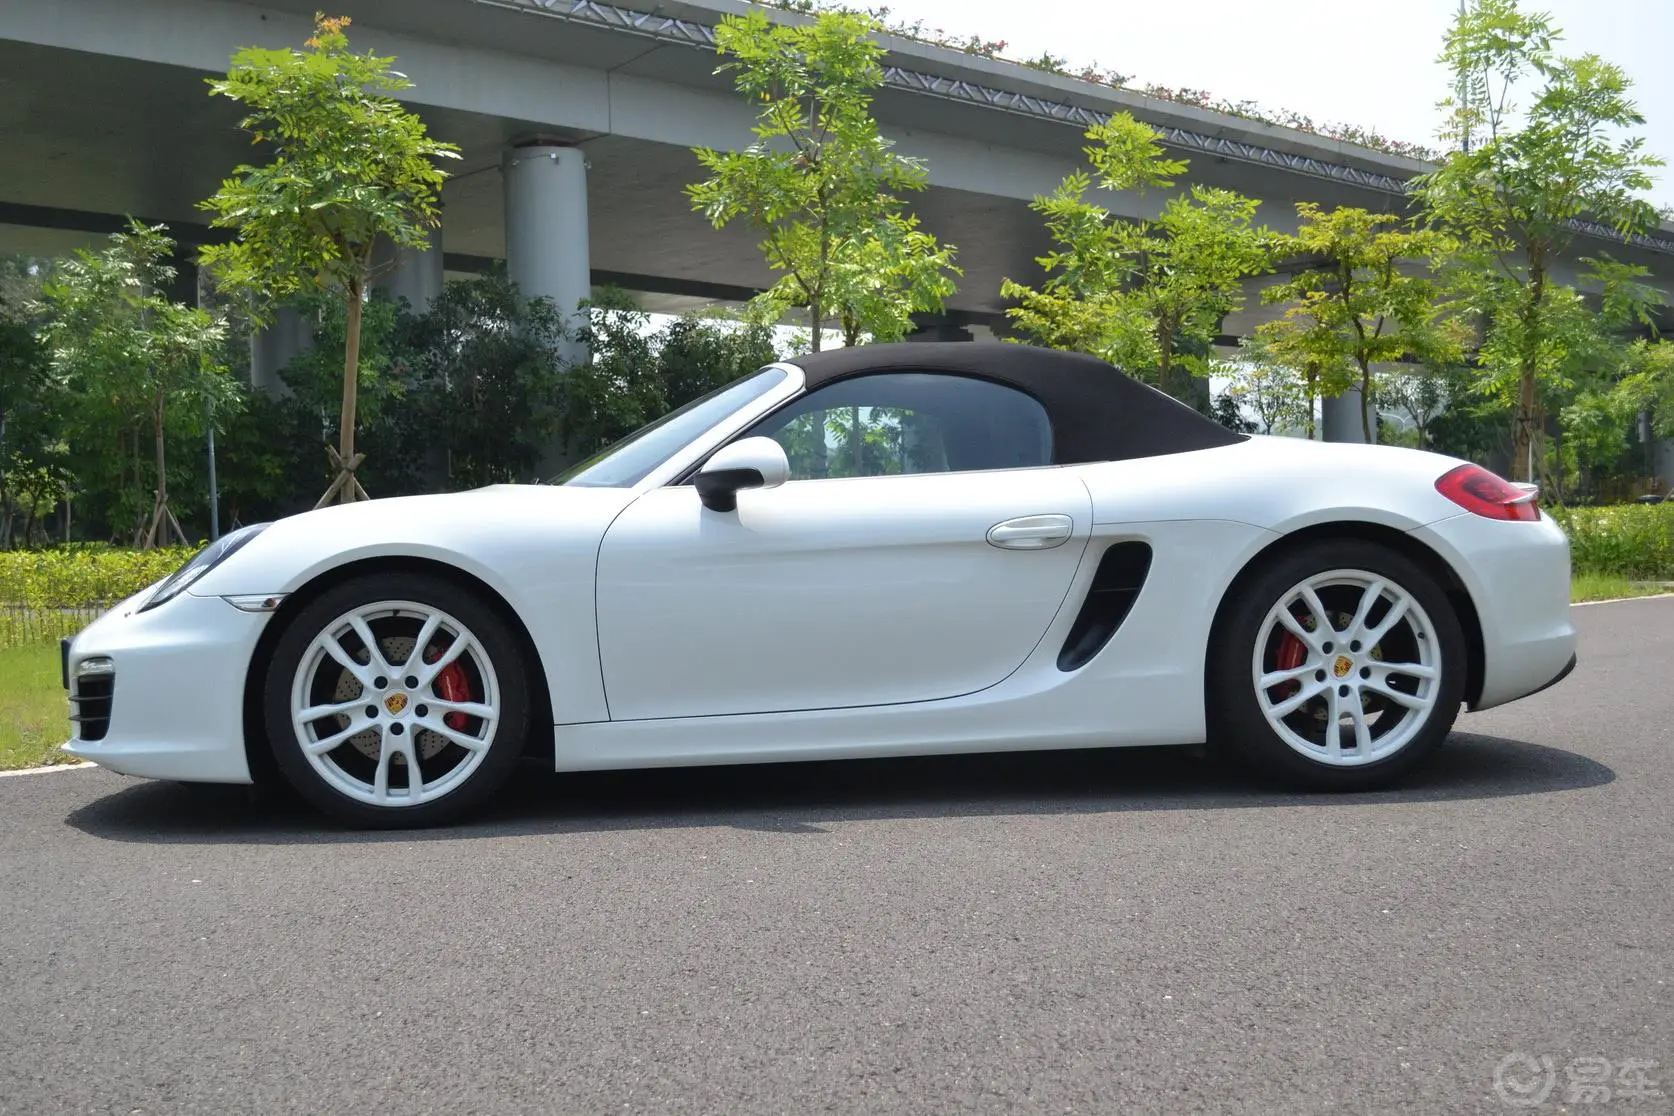 BoxsterBoxster S 3.4正侧车头向左水平